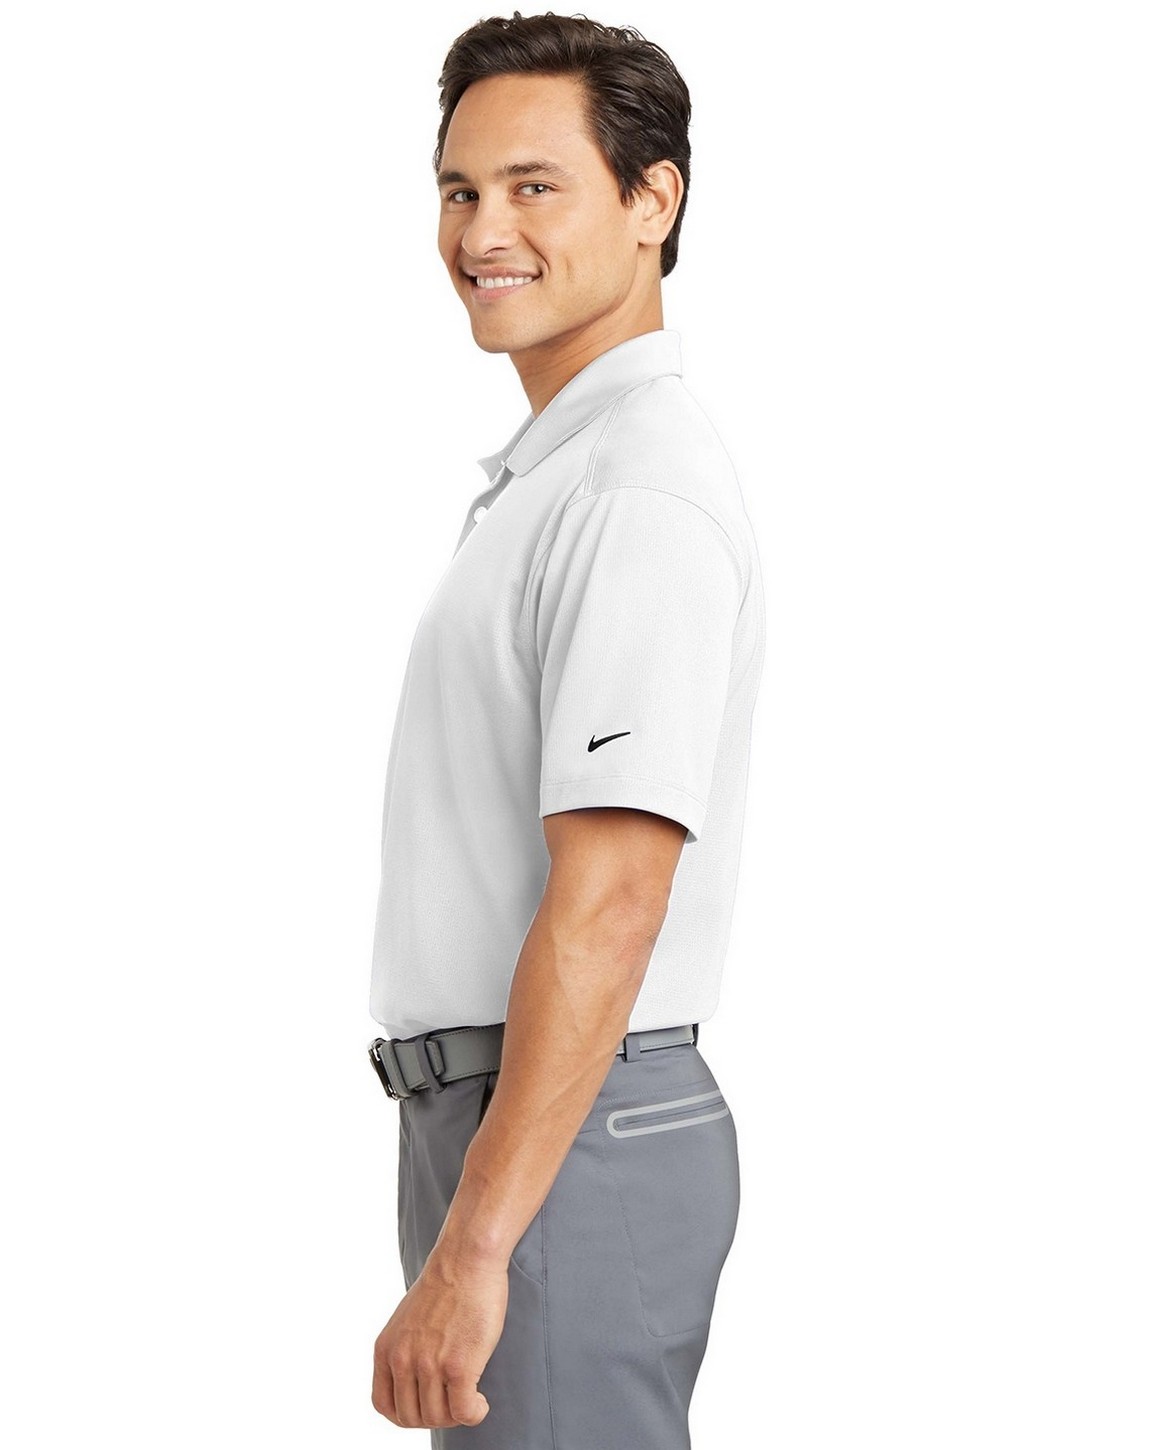 Size Chart for Nike Golf Dri-FIT Logo Embroidered Polo Shirt - For Men